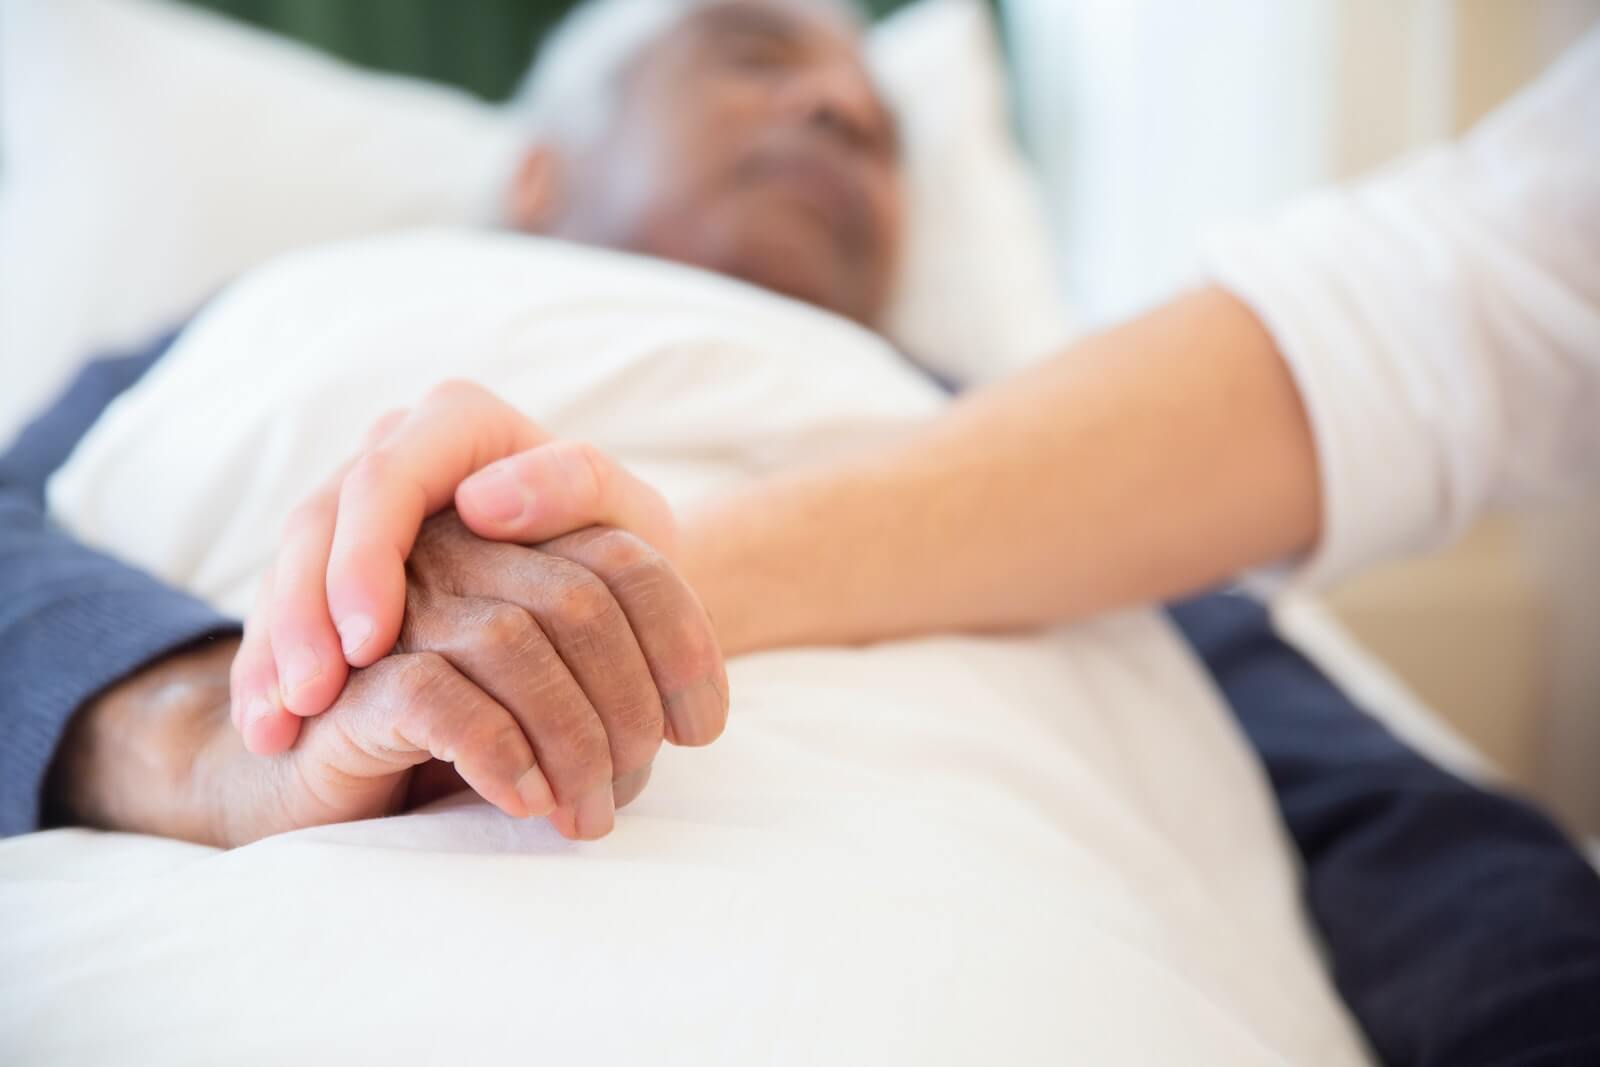 How To Pay for End-of-Life Care